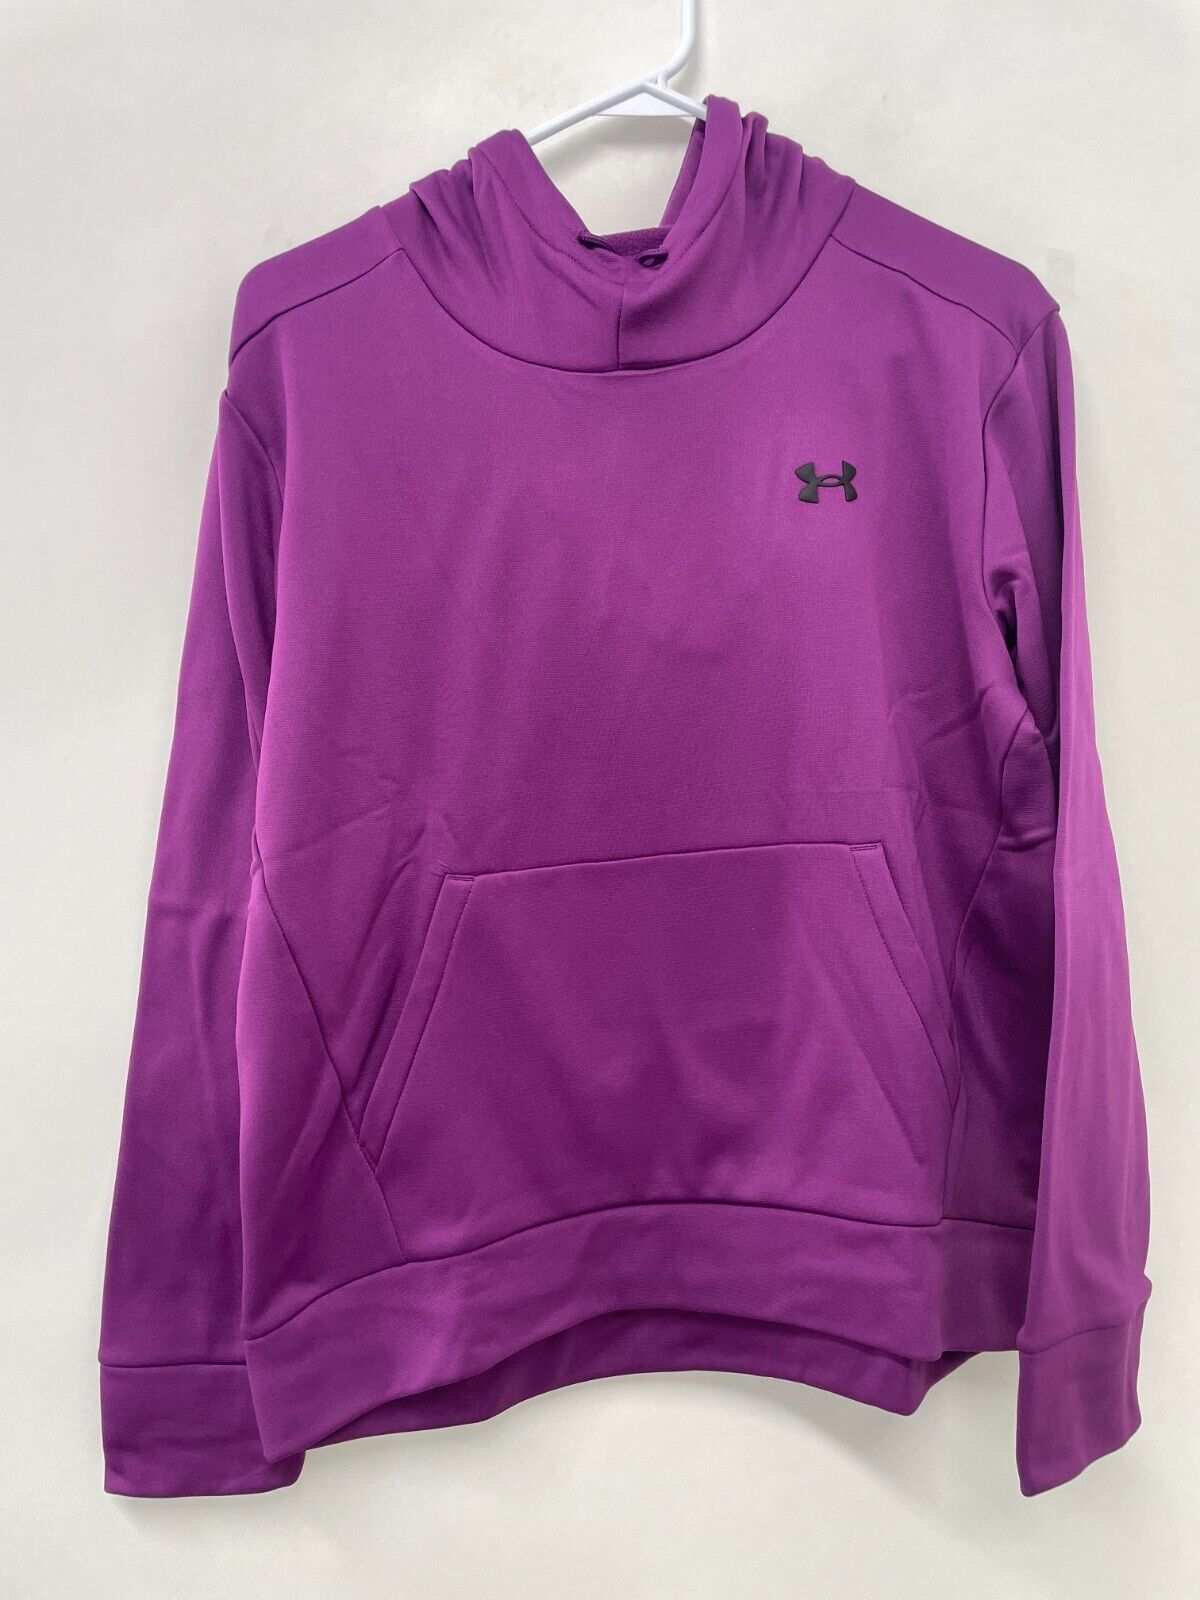 Under Armour Women's S Armour Fleece Left Chest Hoodie Rivalry/Black 1373055 NWT